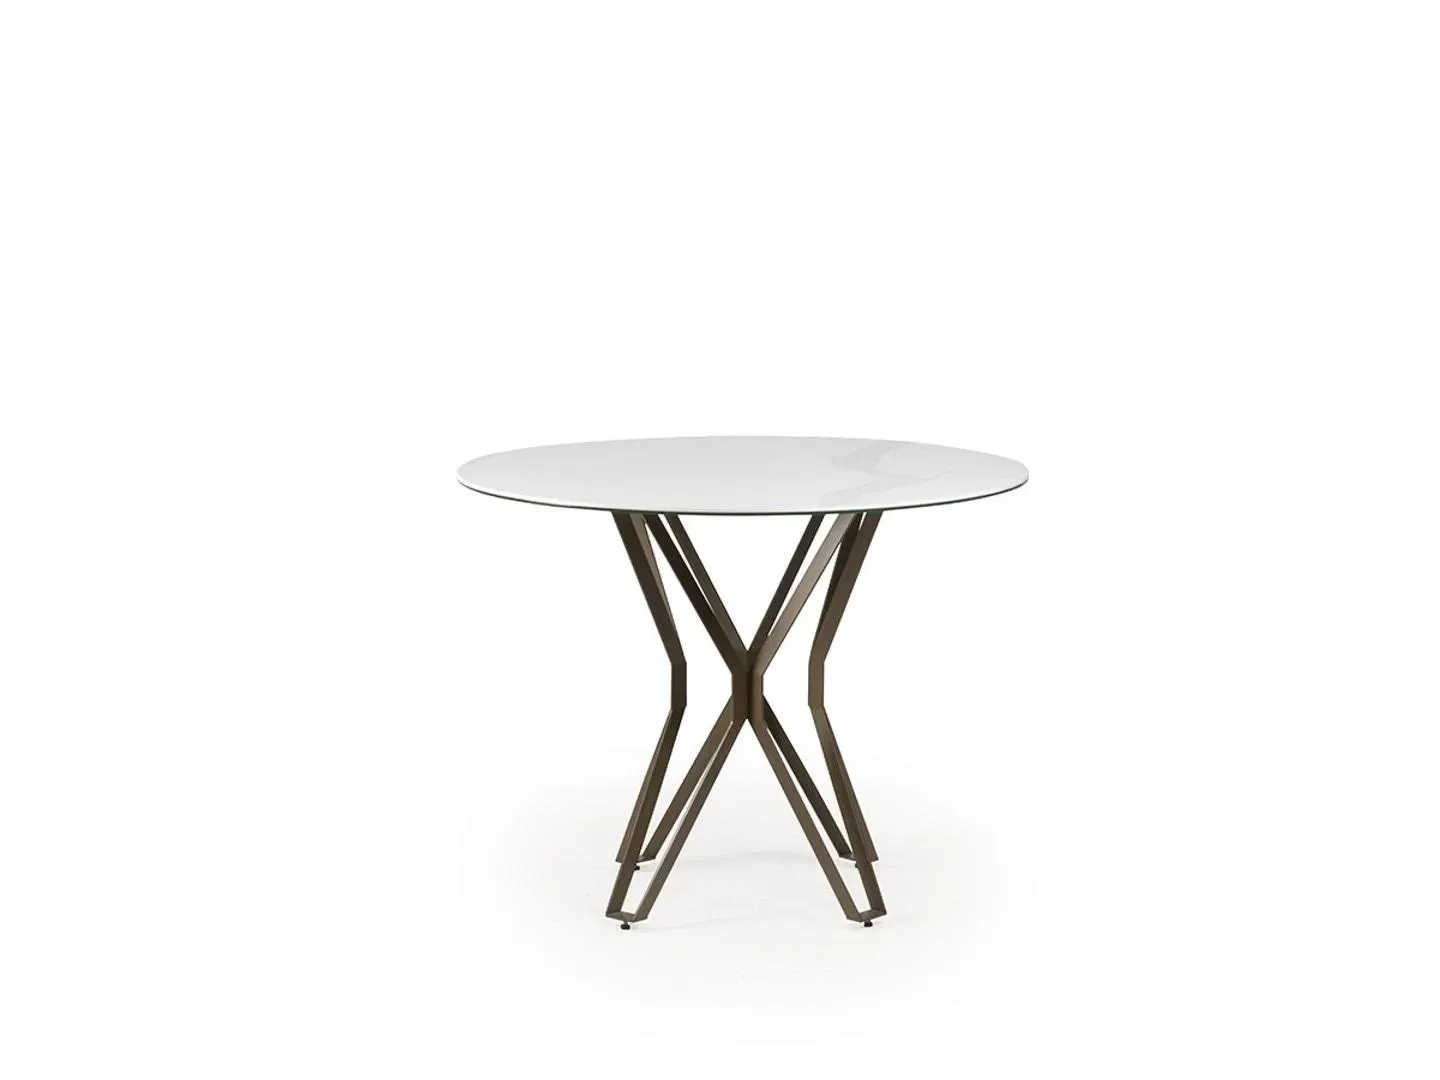 Dining table round Modern kitchen table Round table for dining room